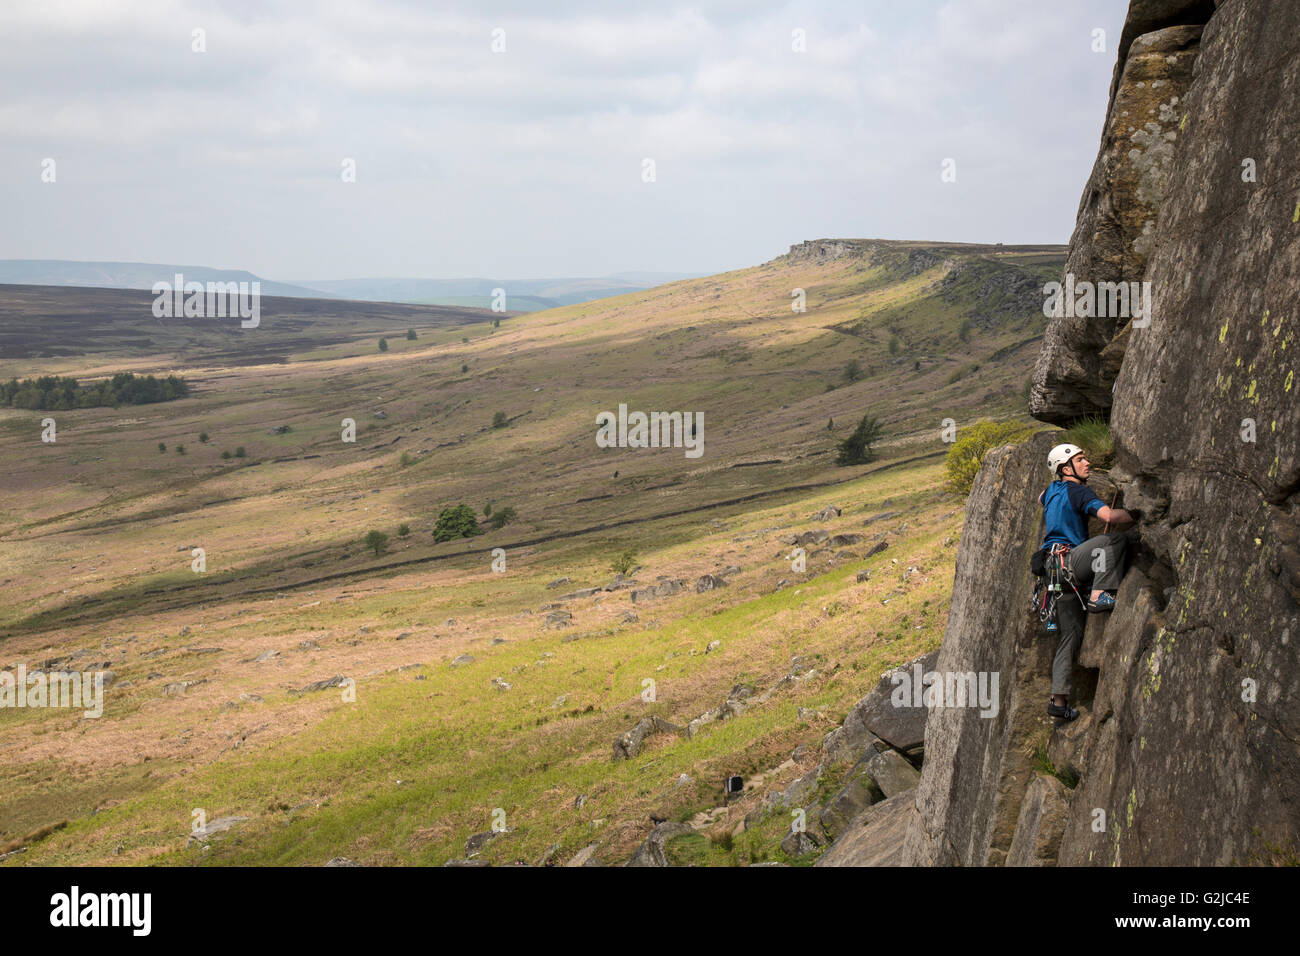 Climber on cliffs of Stanage Plantation in the Peak District, Derbyshire, England. Stock Photo